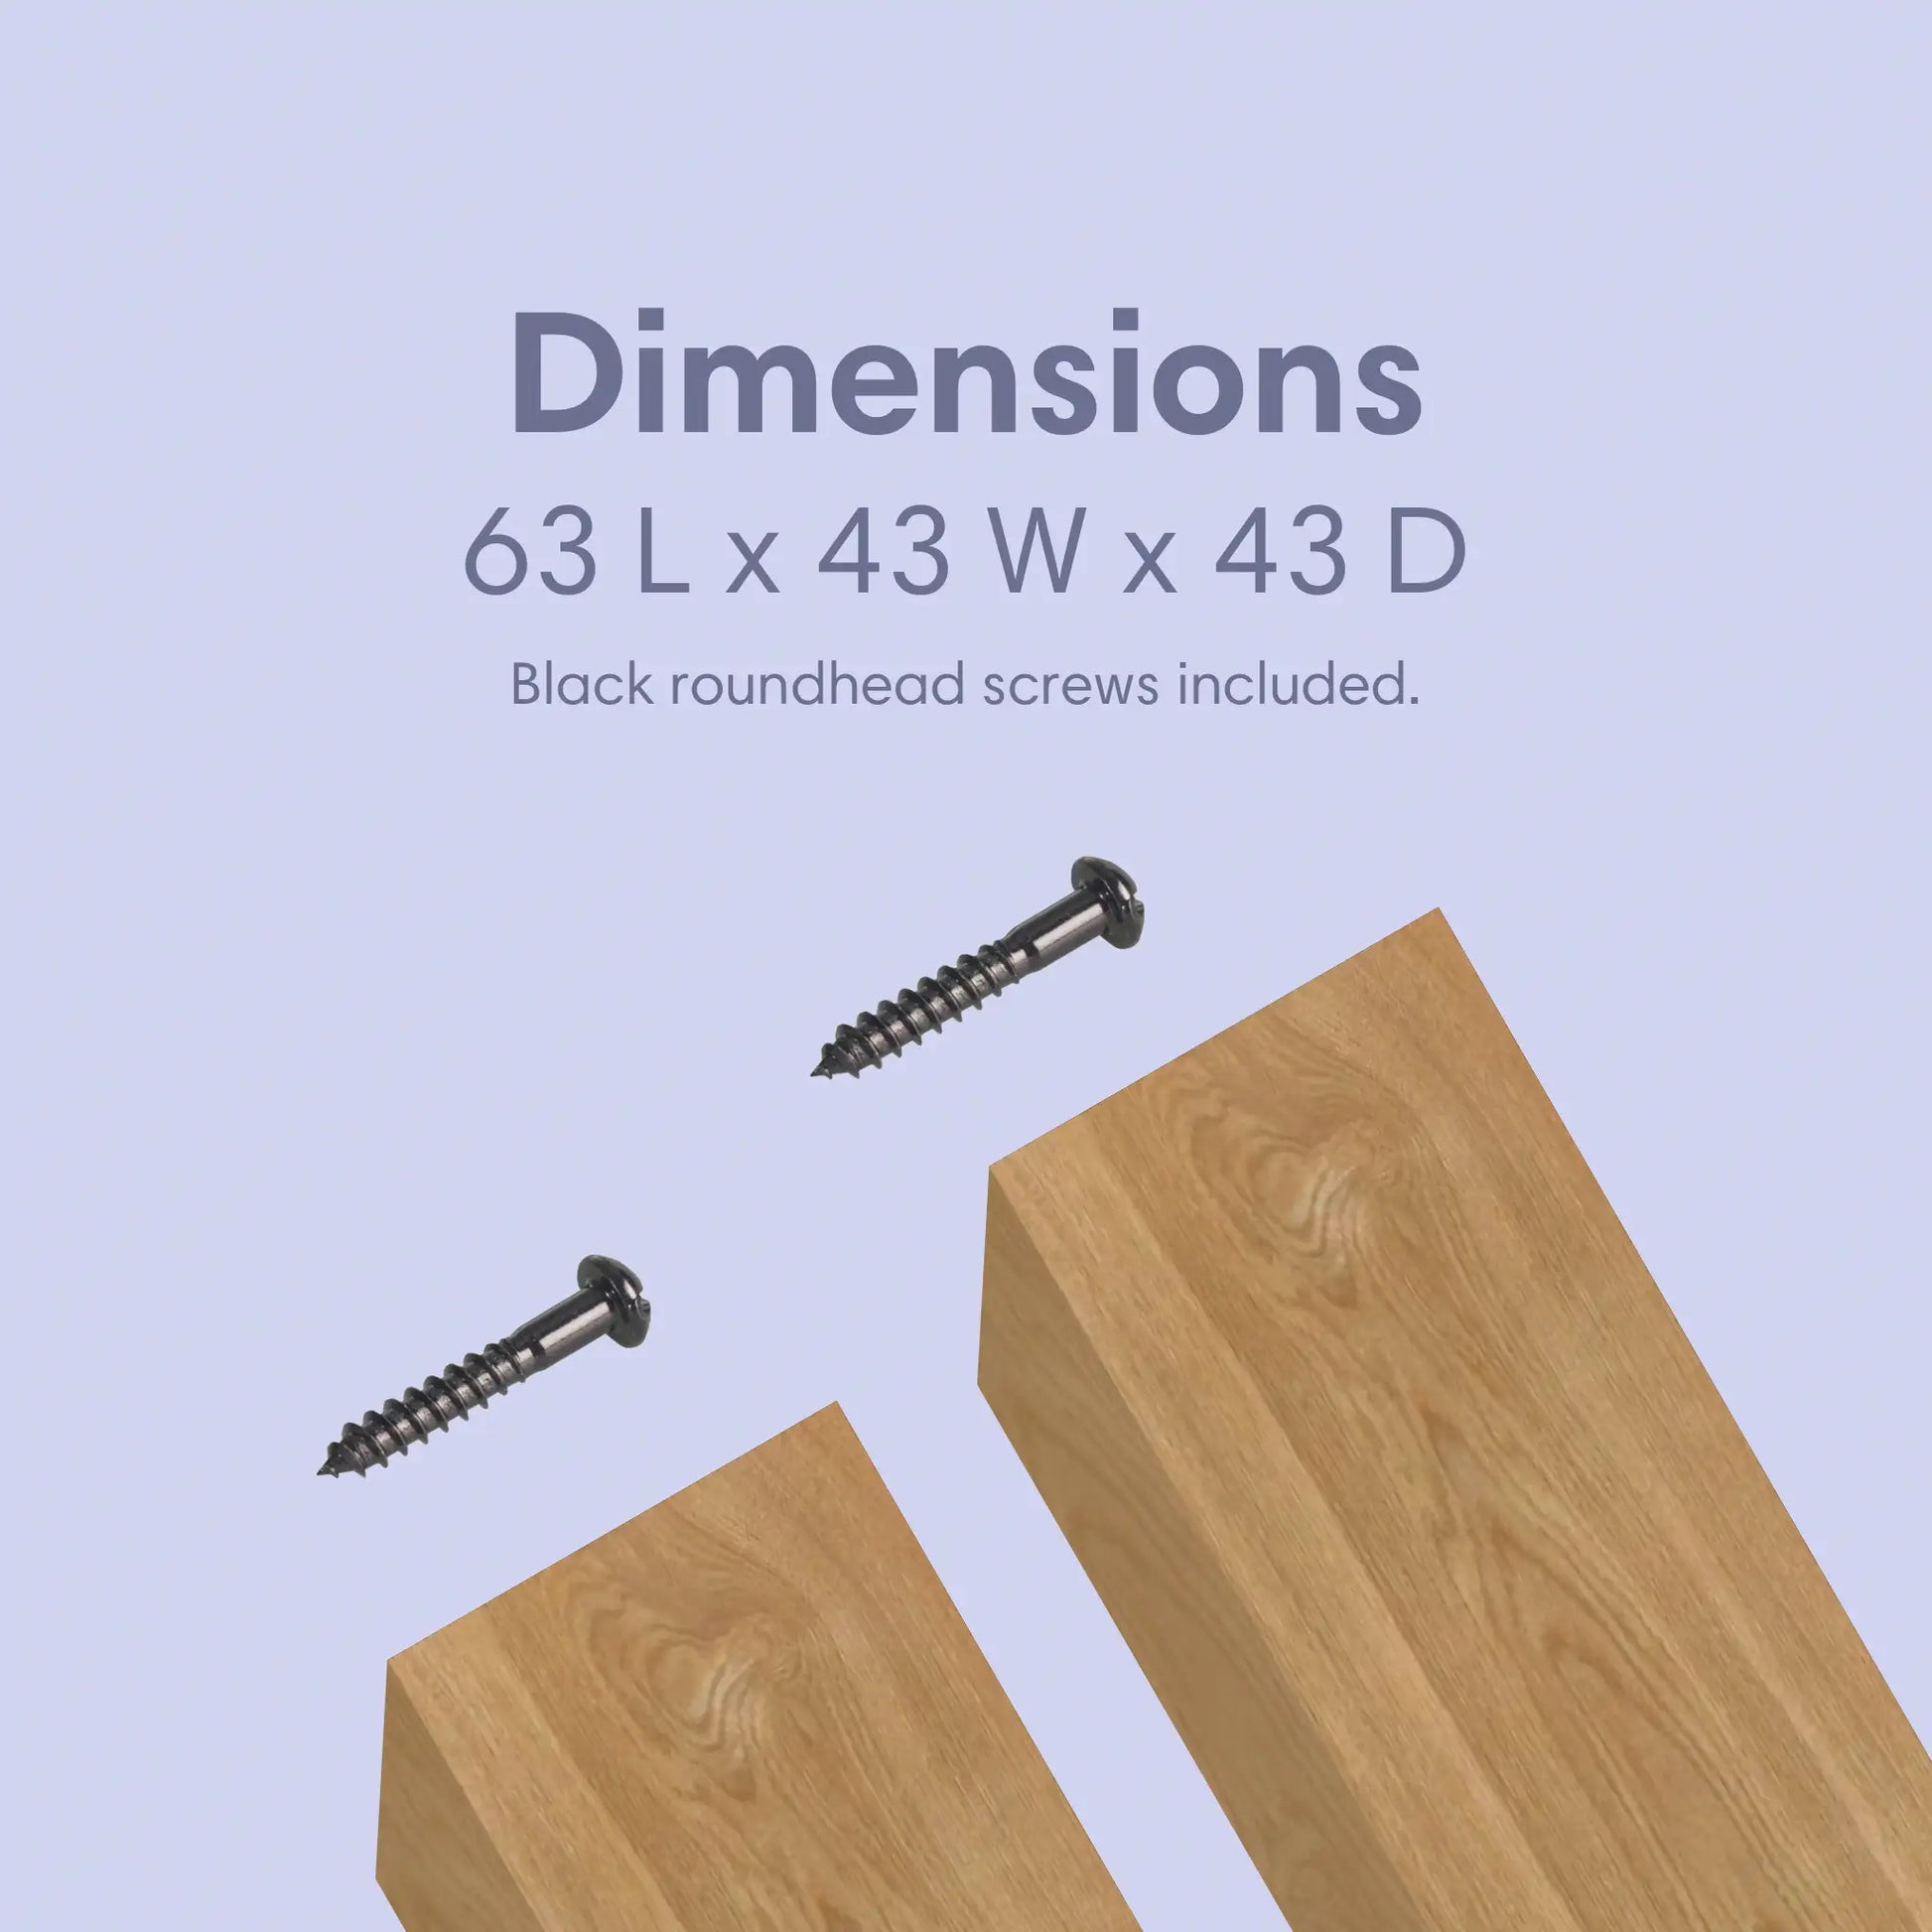 the dimensions of our wooden posts is 63 mm long, 43 mm wide and 43 mm deep